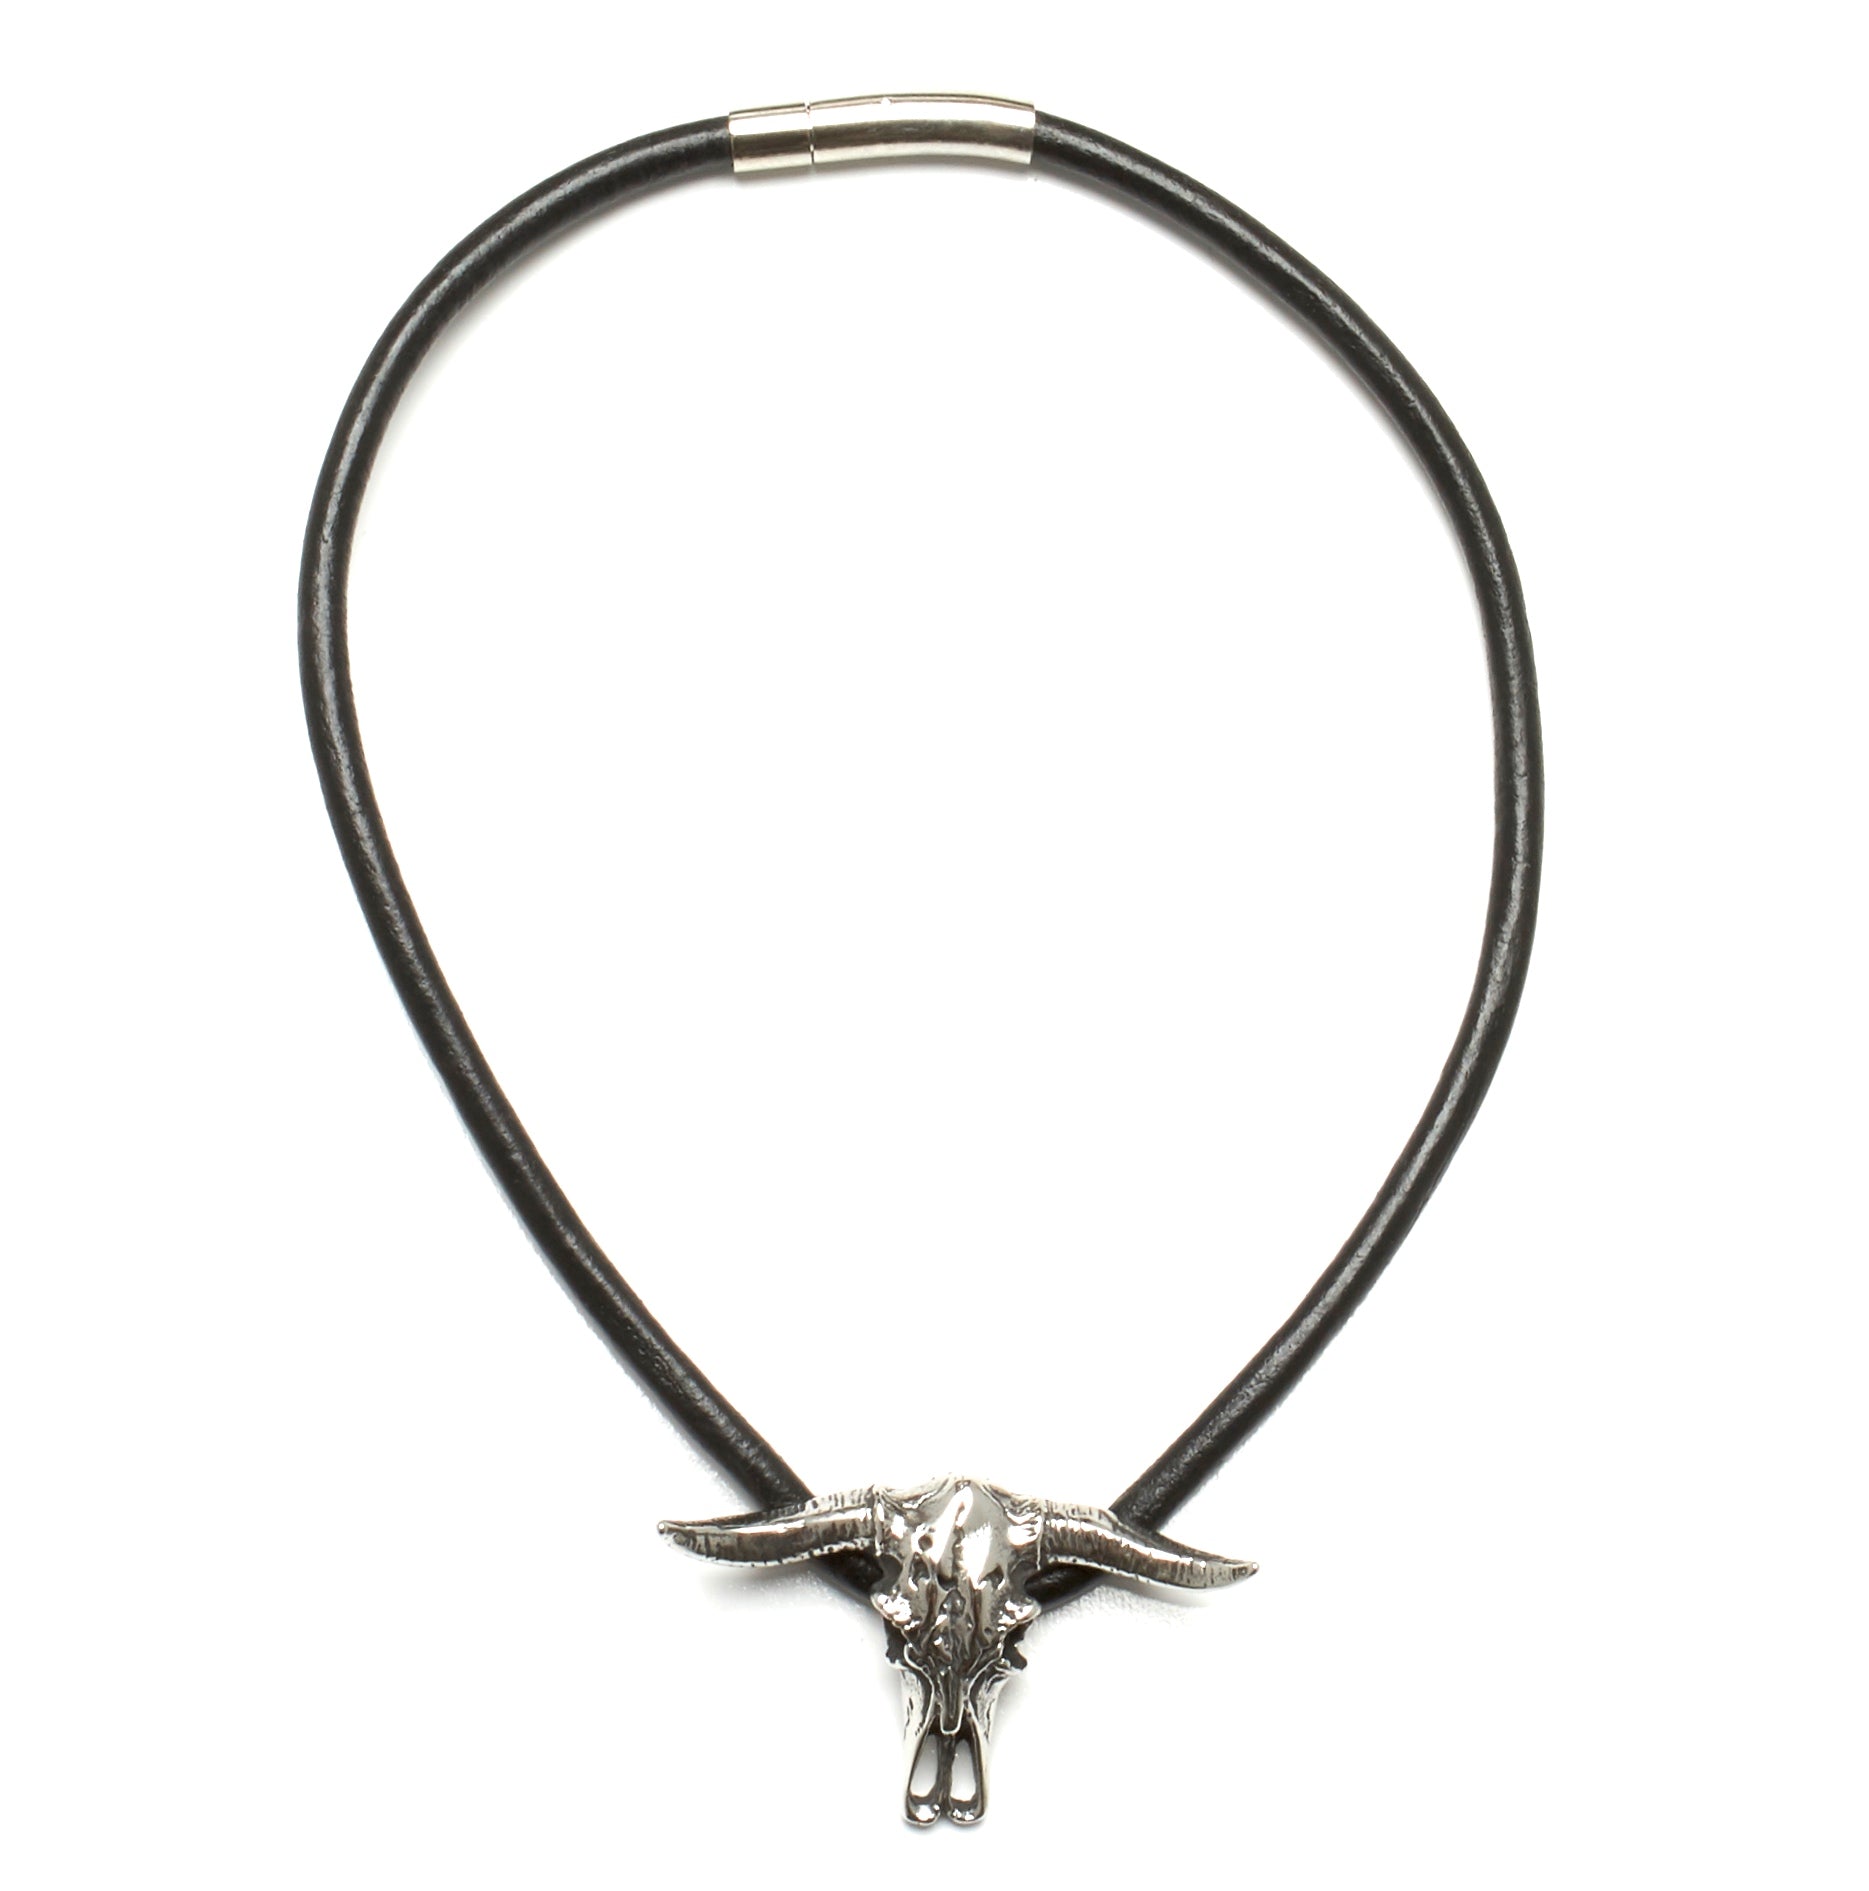 5 MM ROUND LEATHER NECKLACE WITH STAINLESS STEEL LONGHORN PENDANT by nyet jewelry.